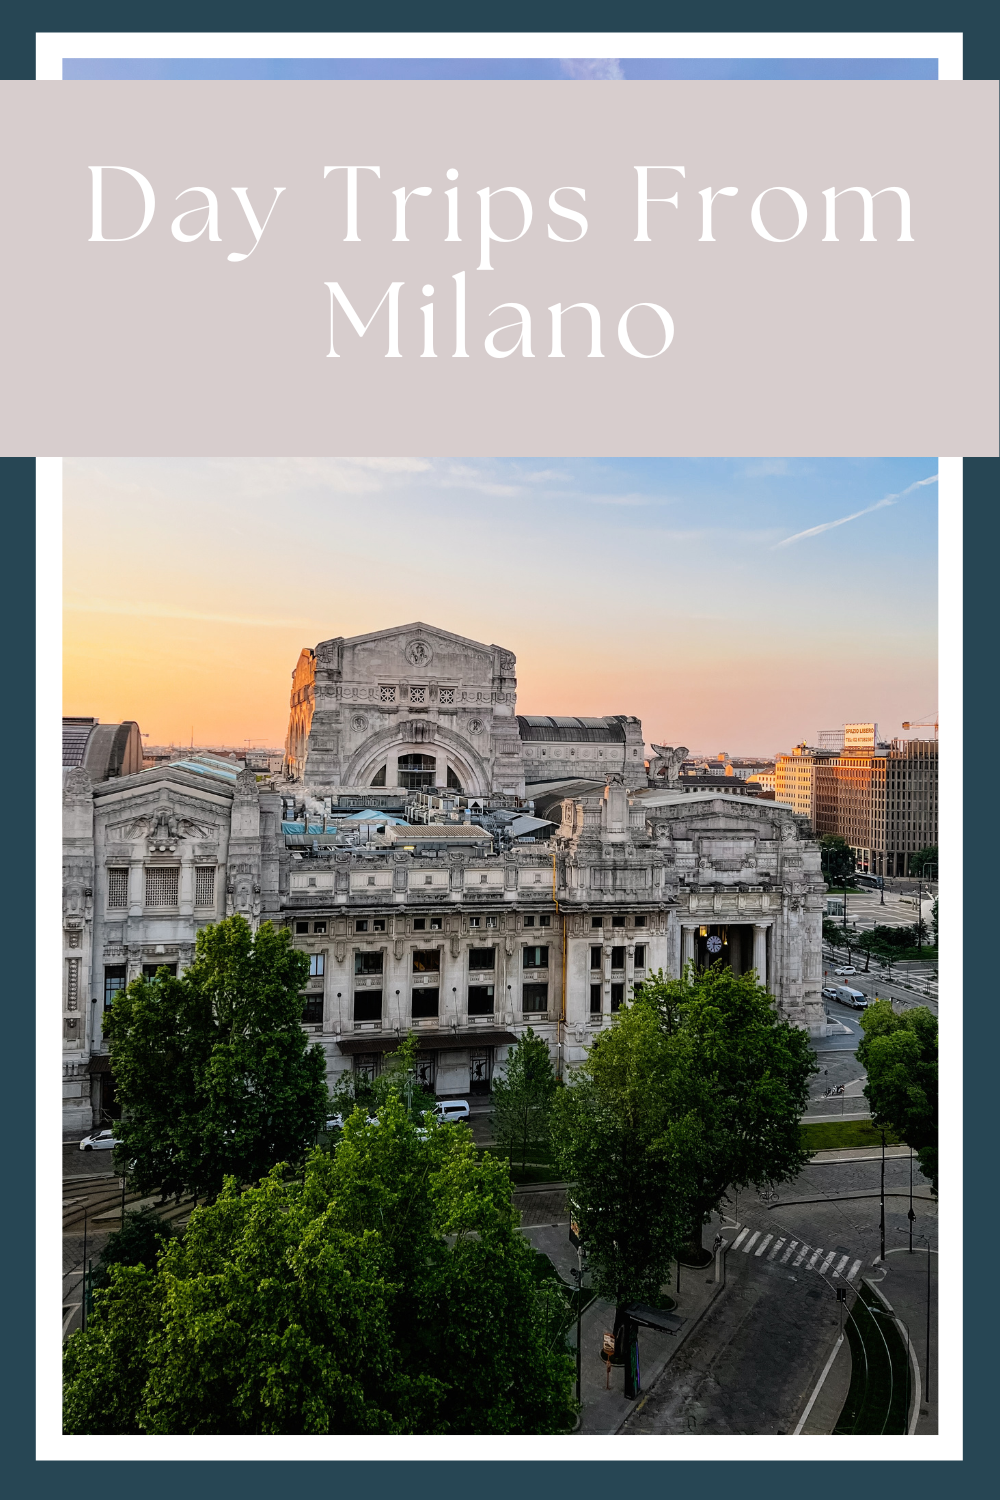 day trips from Milano